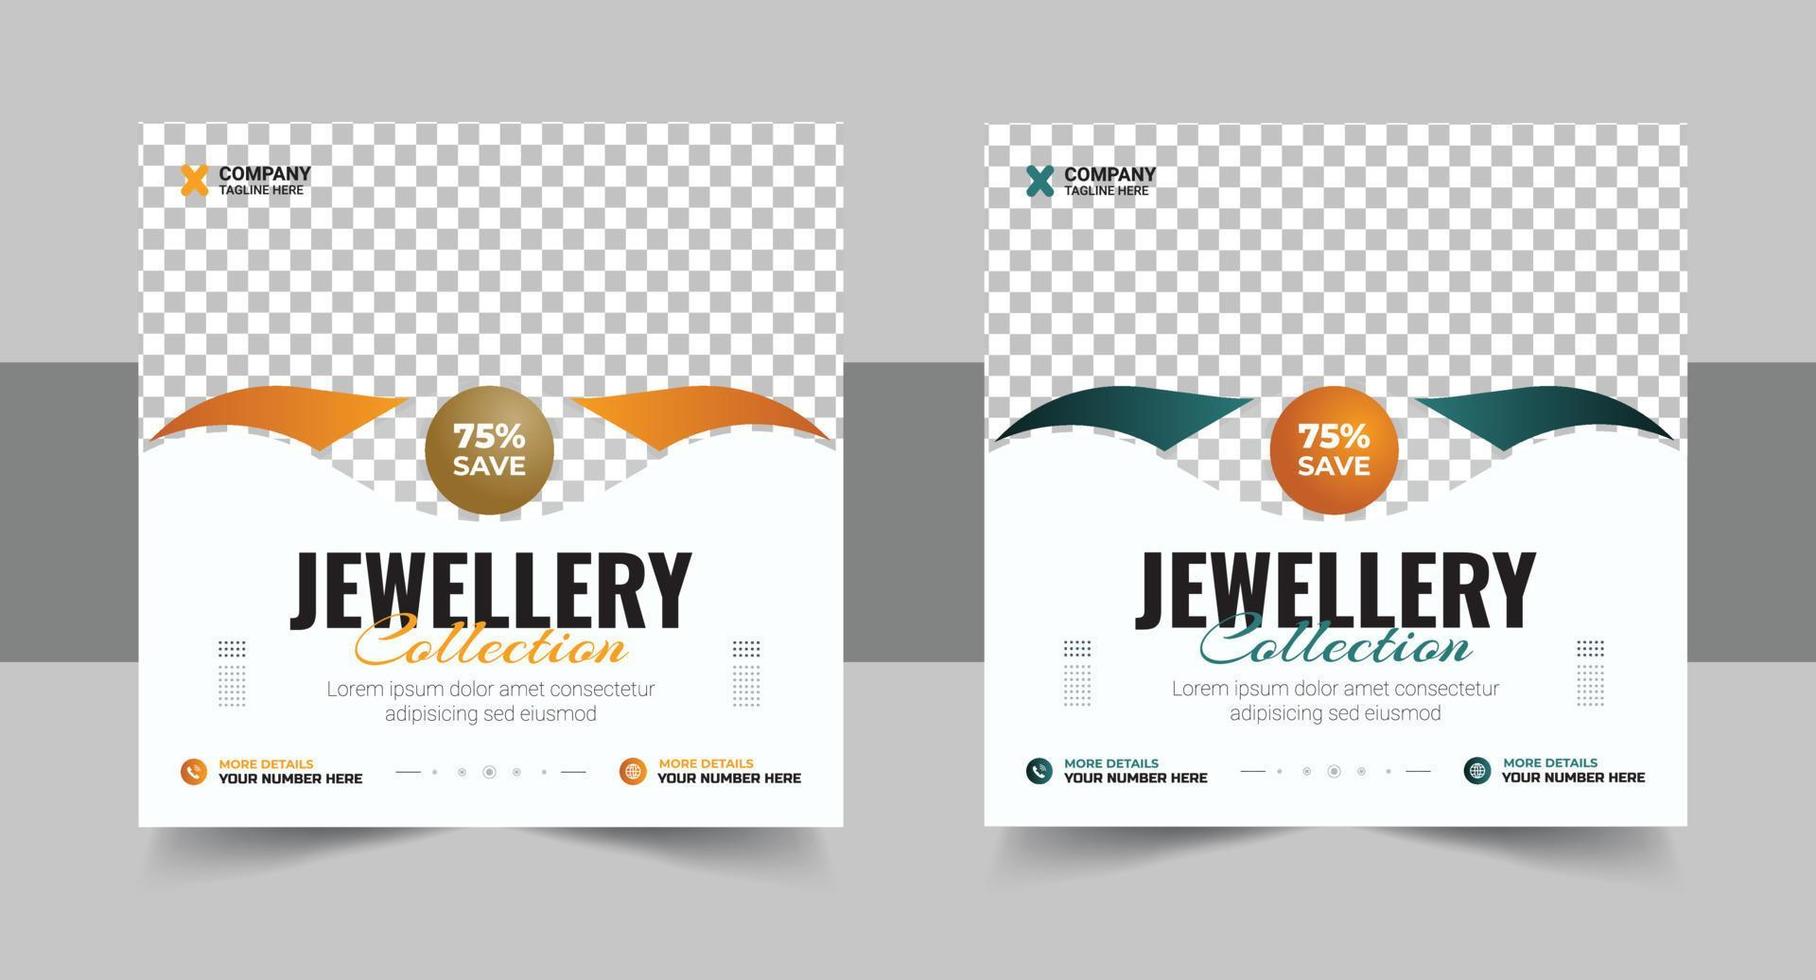 Jewellery collections social media post, Jewellery Collection Web Banner or Social Media Post Template Design vector